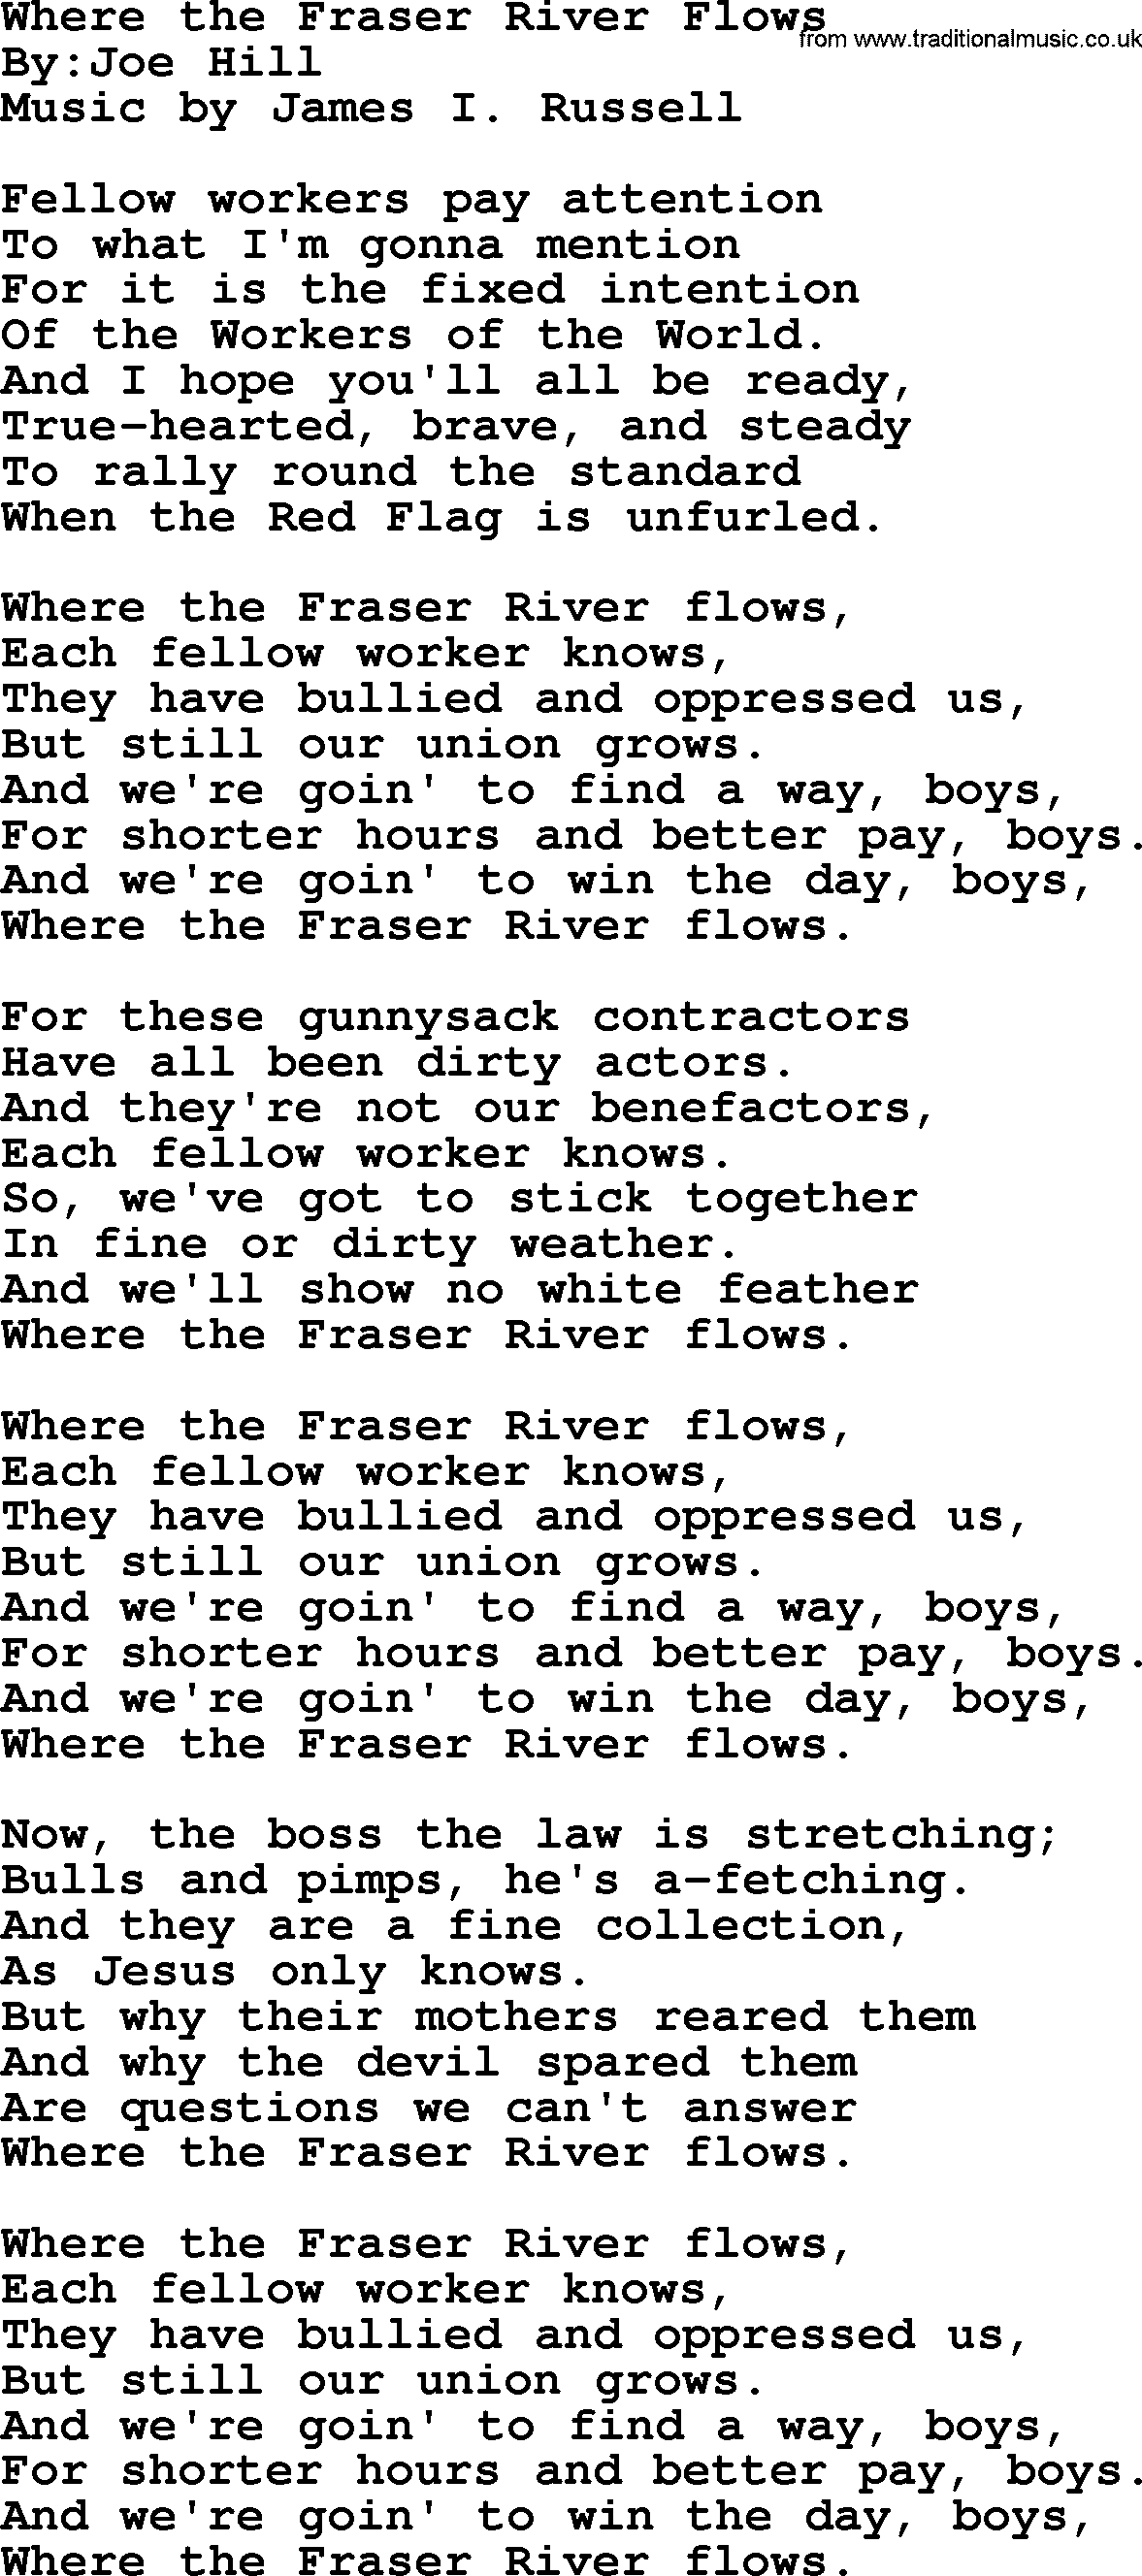 Political, Solidarity, Workers or Union song: Where The Fraser River Flows, lyrics